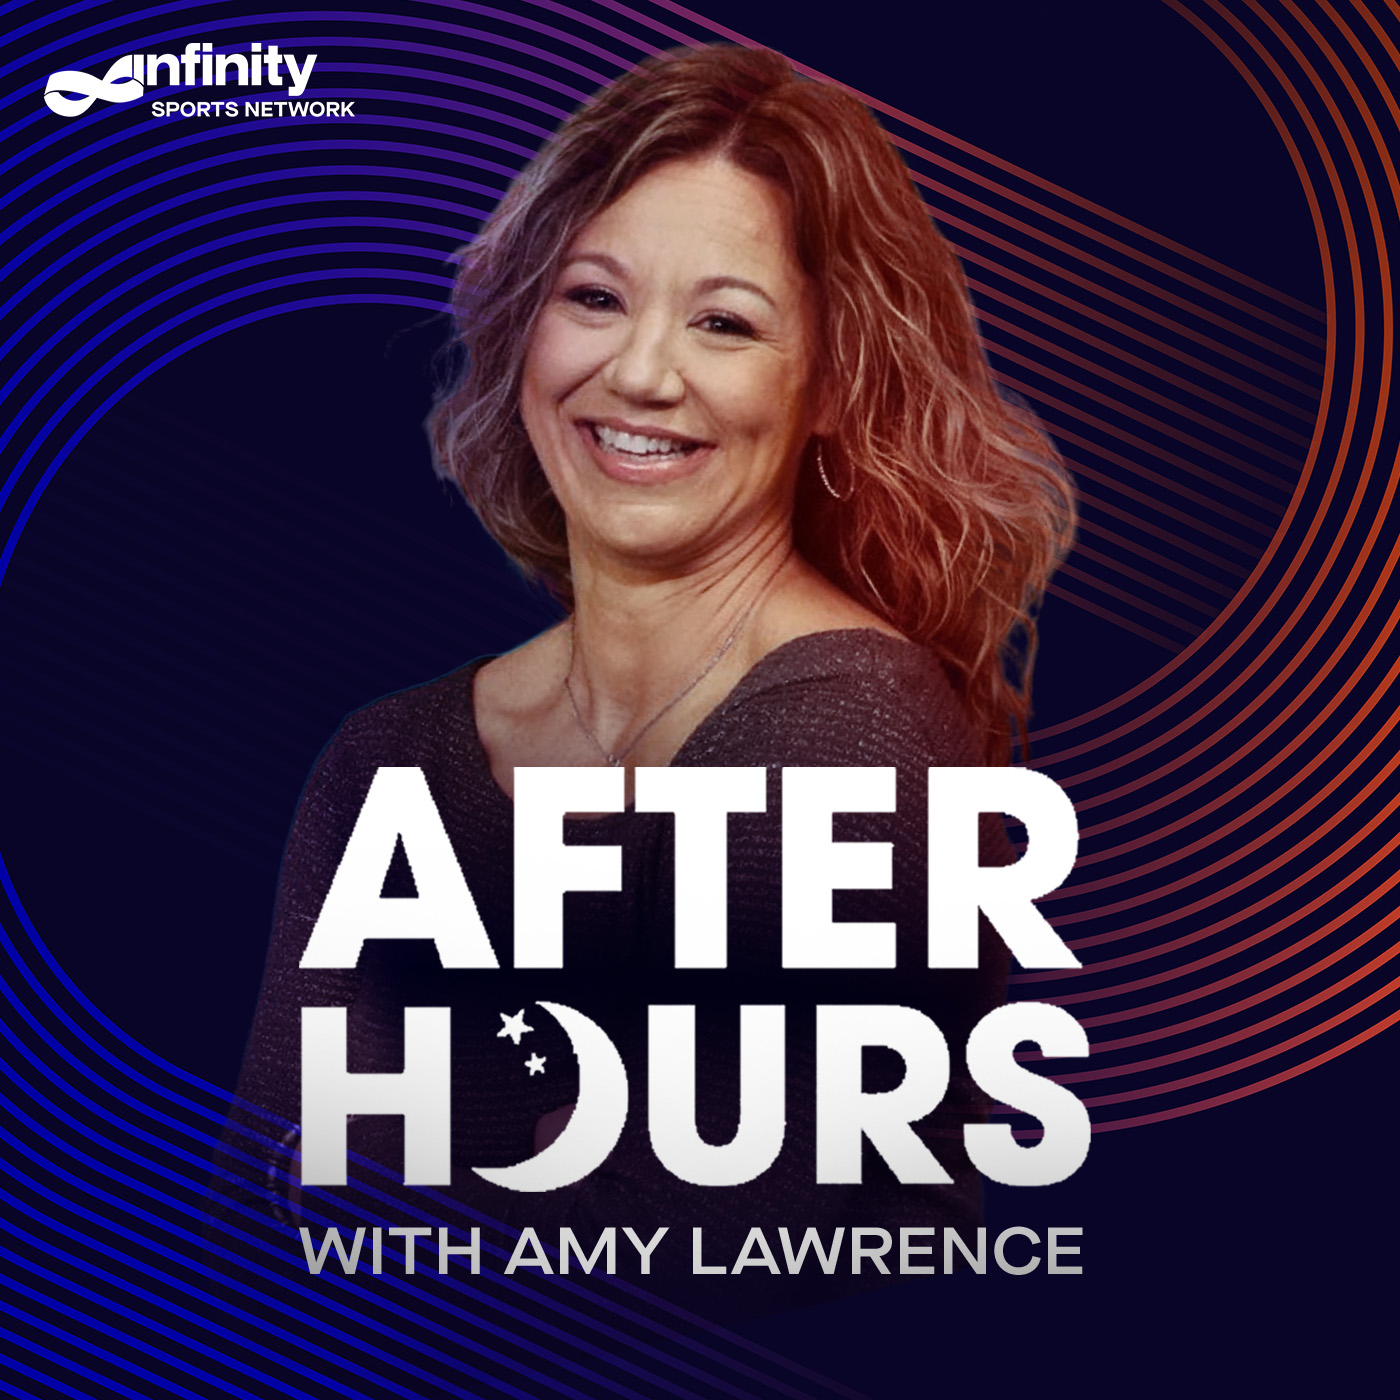 8-26-21 After Hours with Amy Lawrence PODCAST: Hour 4